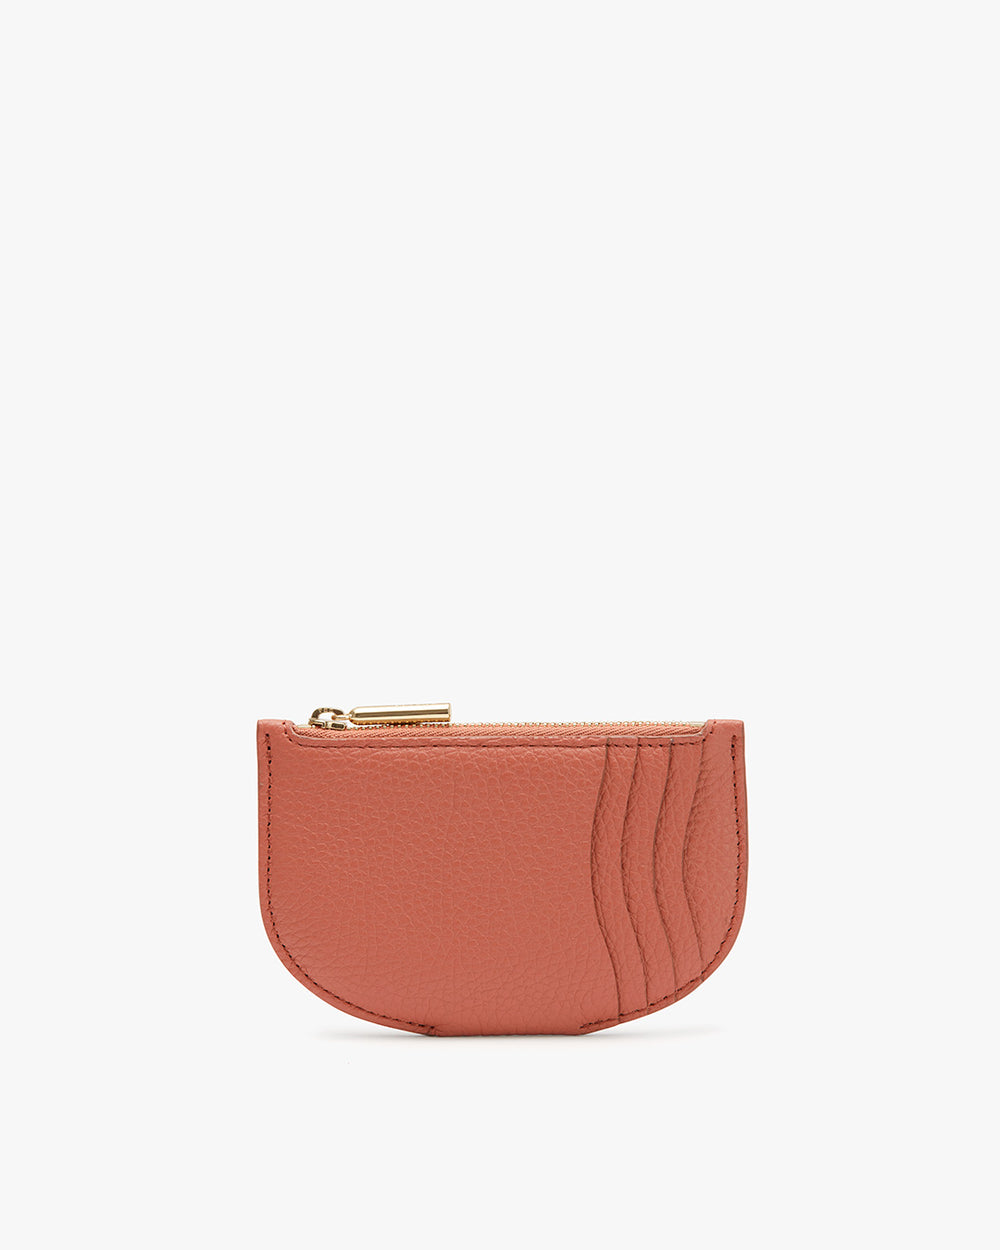 Small purse with a zipper and wavy stitching on front.